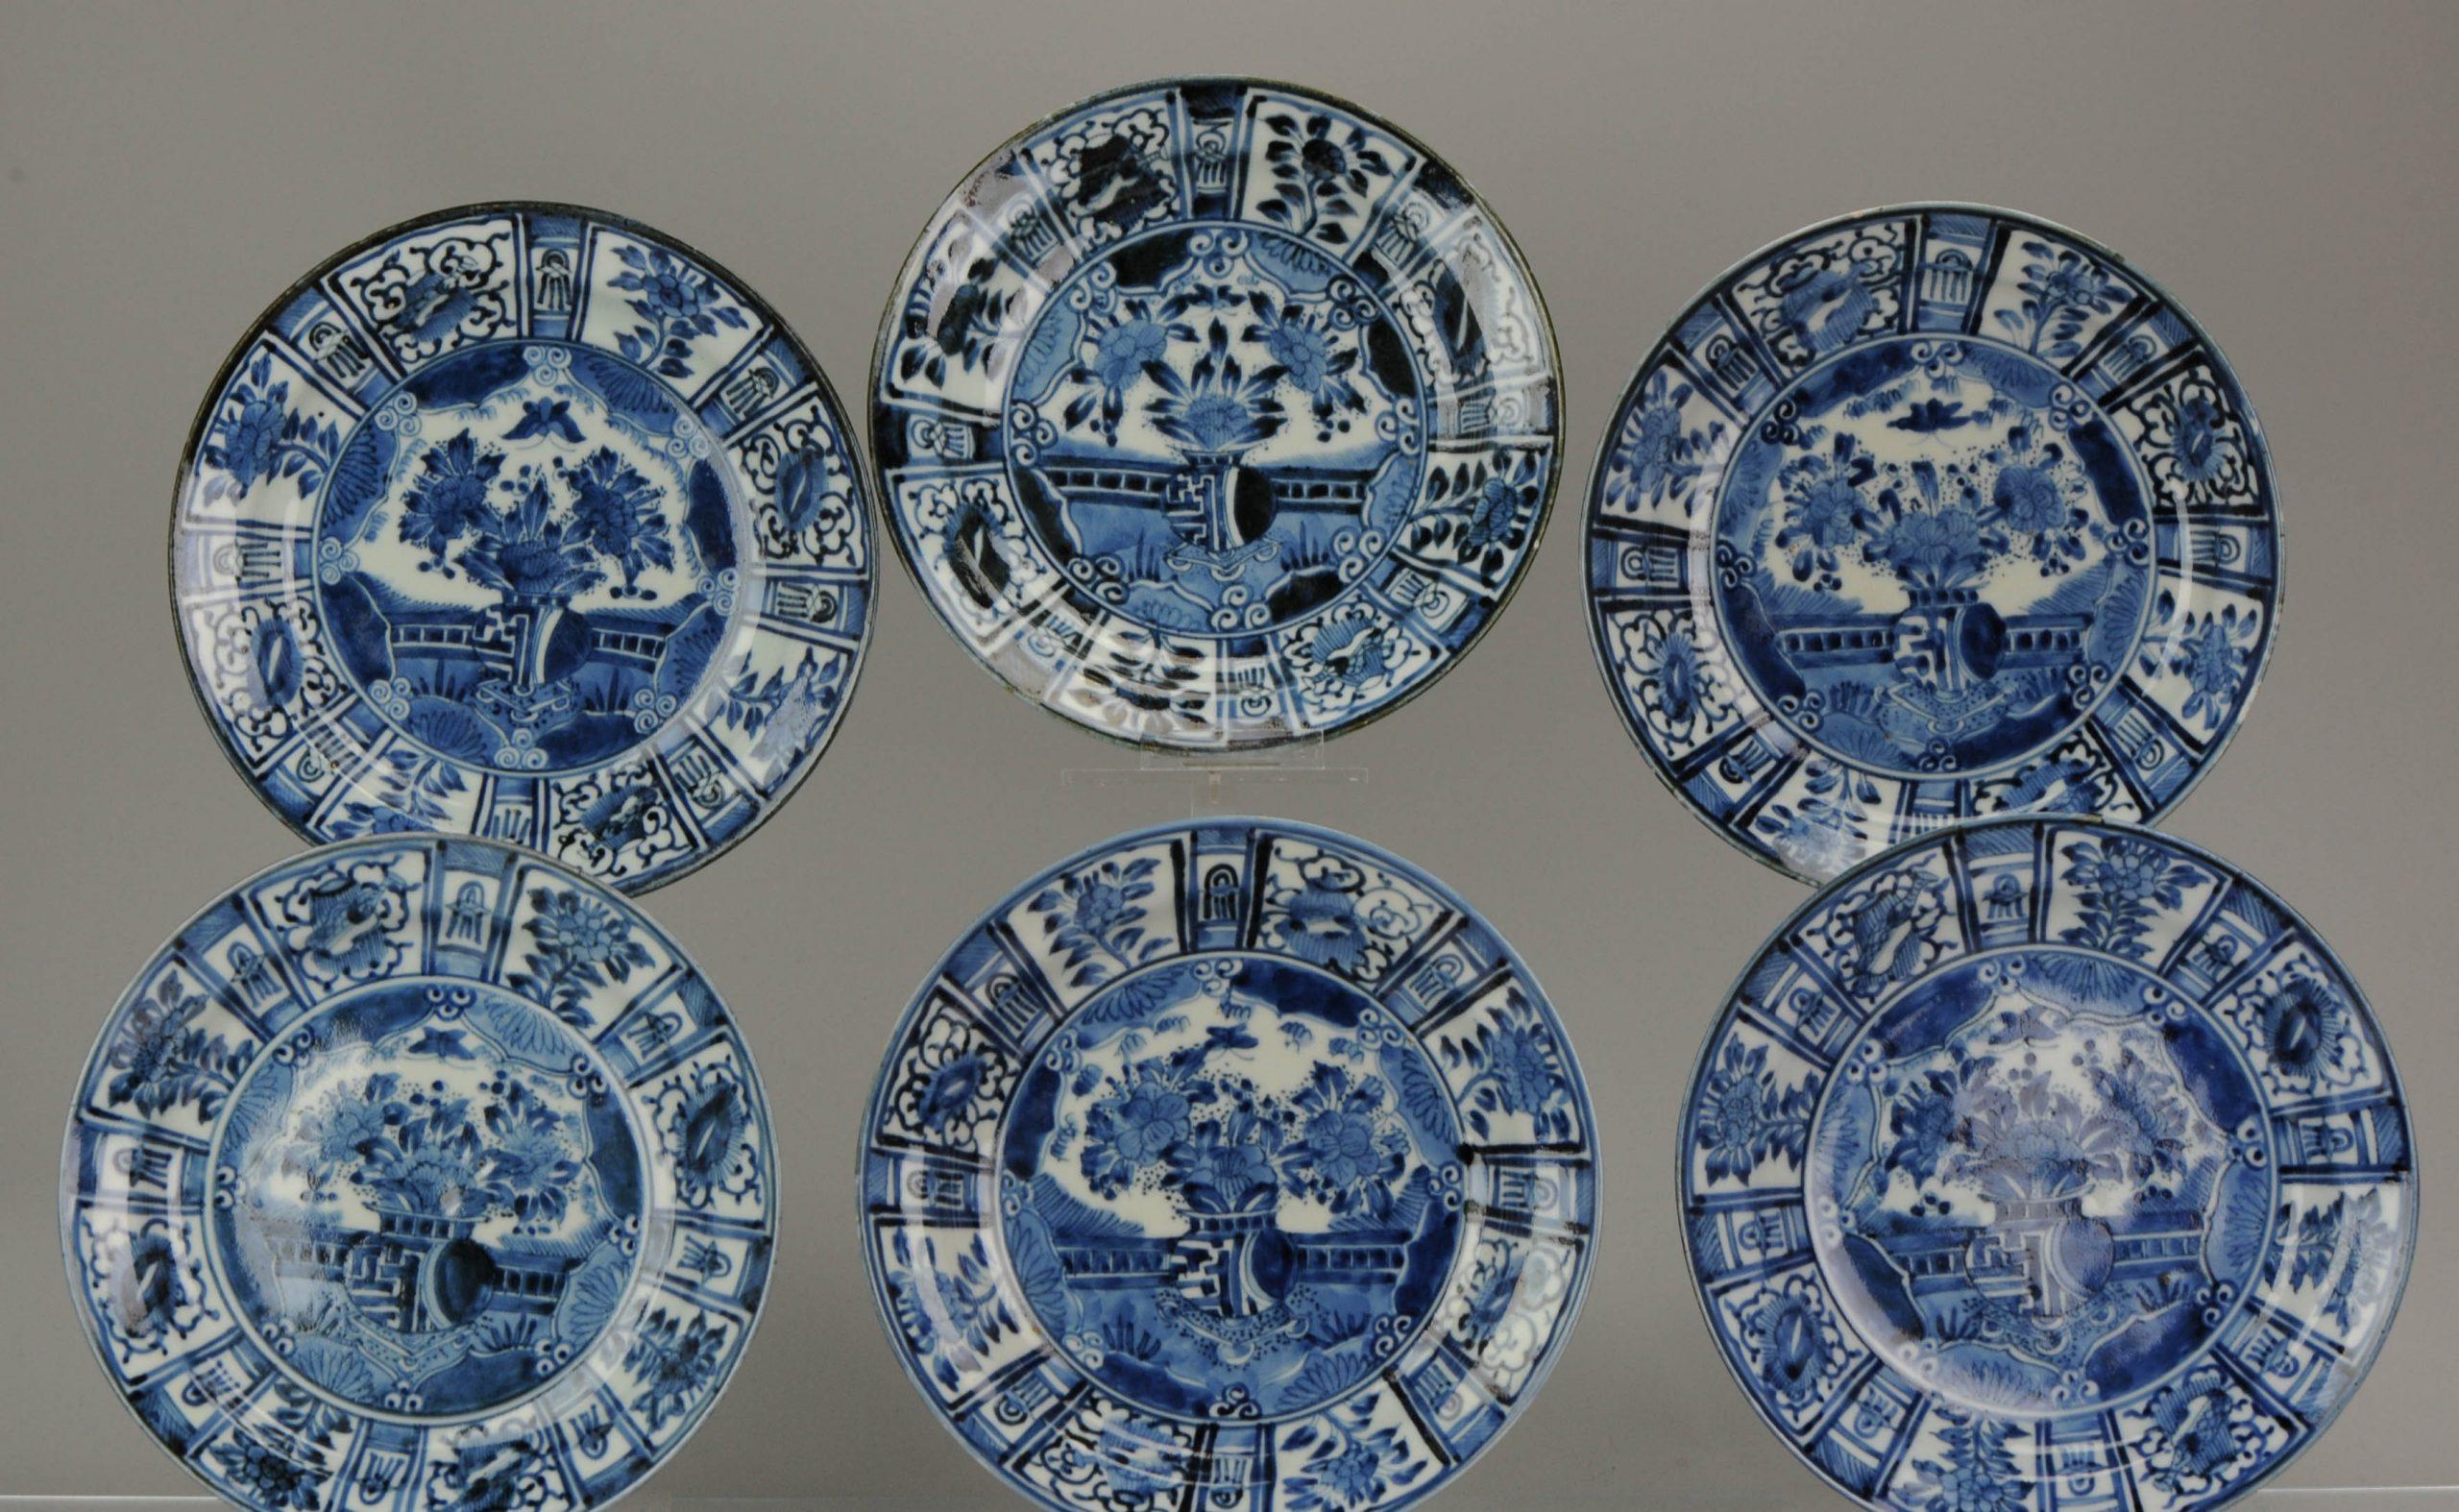 Description:
A very nicely decorated set of 6 arita plates in Kraak wanli style. Top quality

A scene of flower basket, peony, chrysanthemum and buddhist emblems

Peony

Peony - Mu-Dan - Queen of Flowers, the peony is an emblem of wealth and